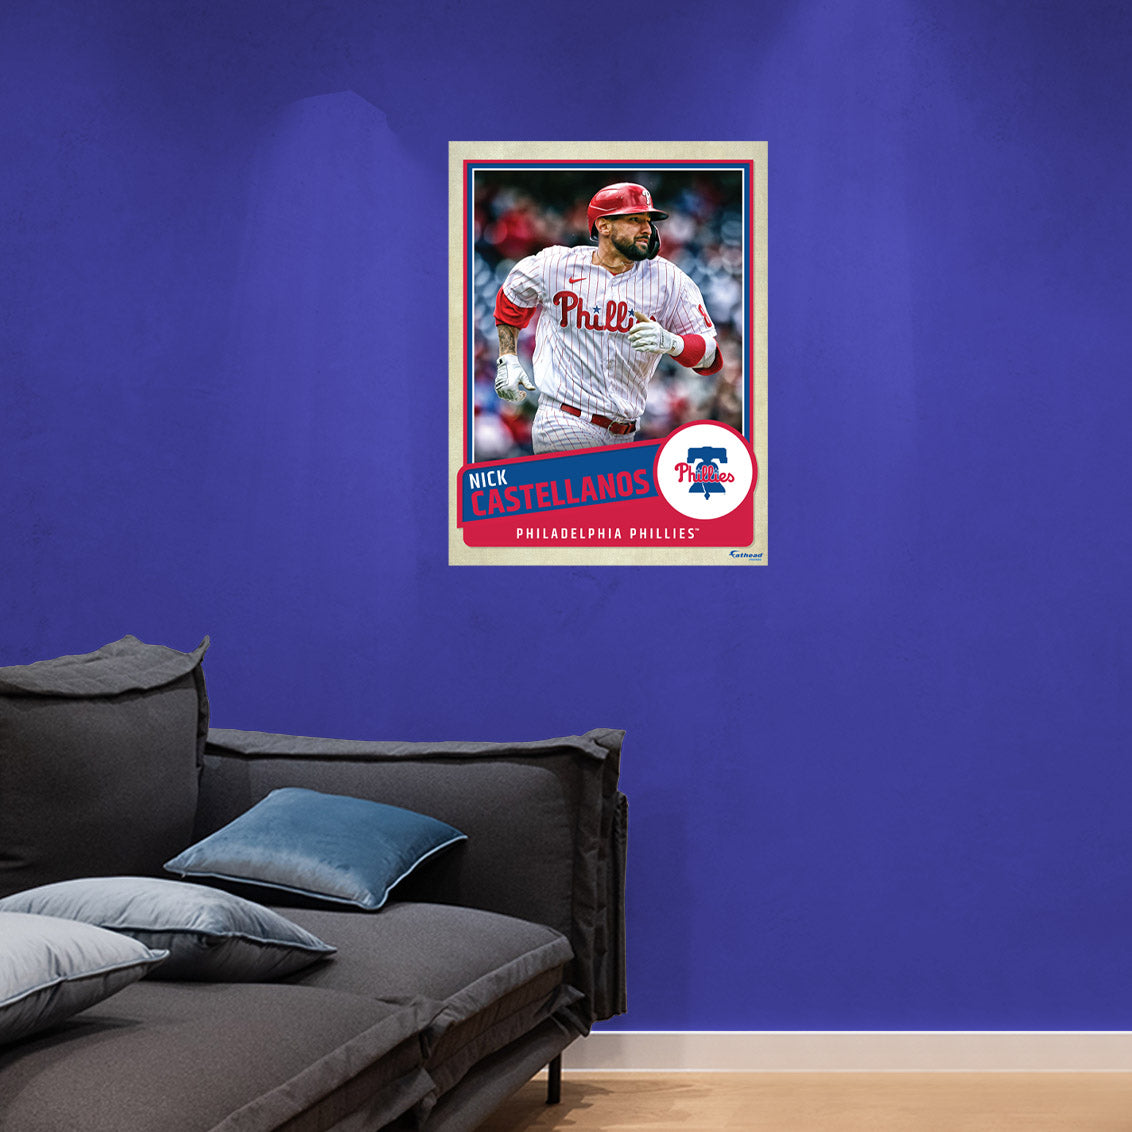 Philadelphia Phillies: Nick Castellanos  Poster        - Officially Licensed MLB Removable     Adhesive Decal